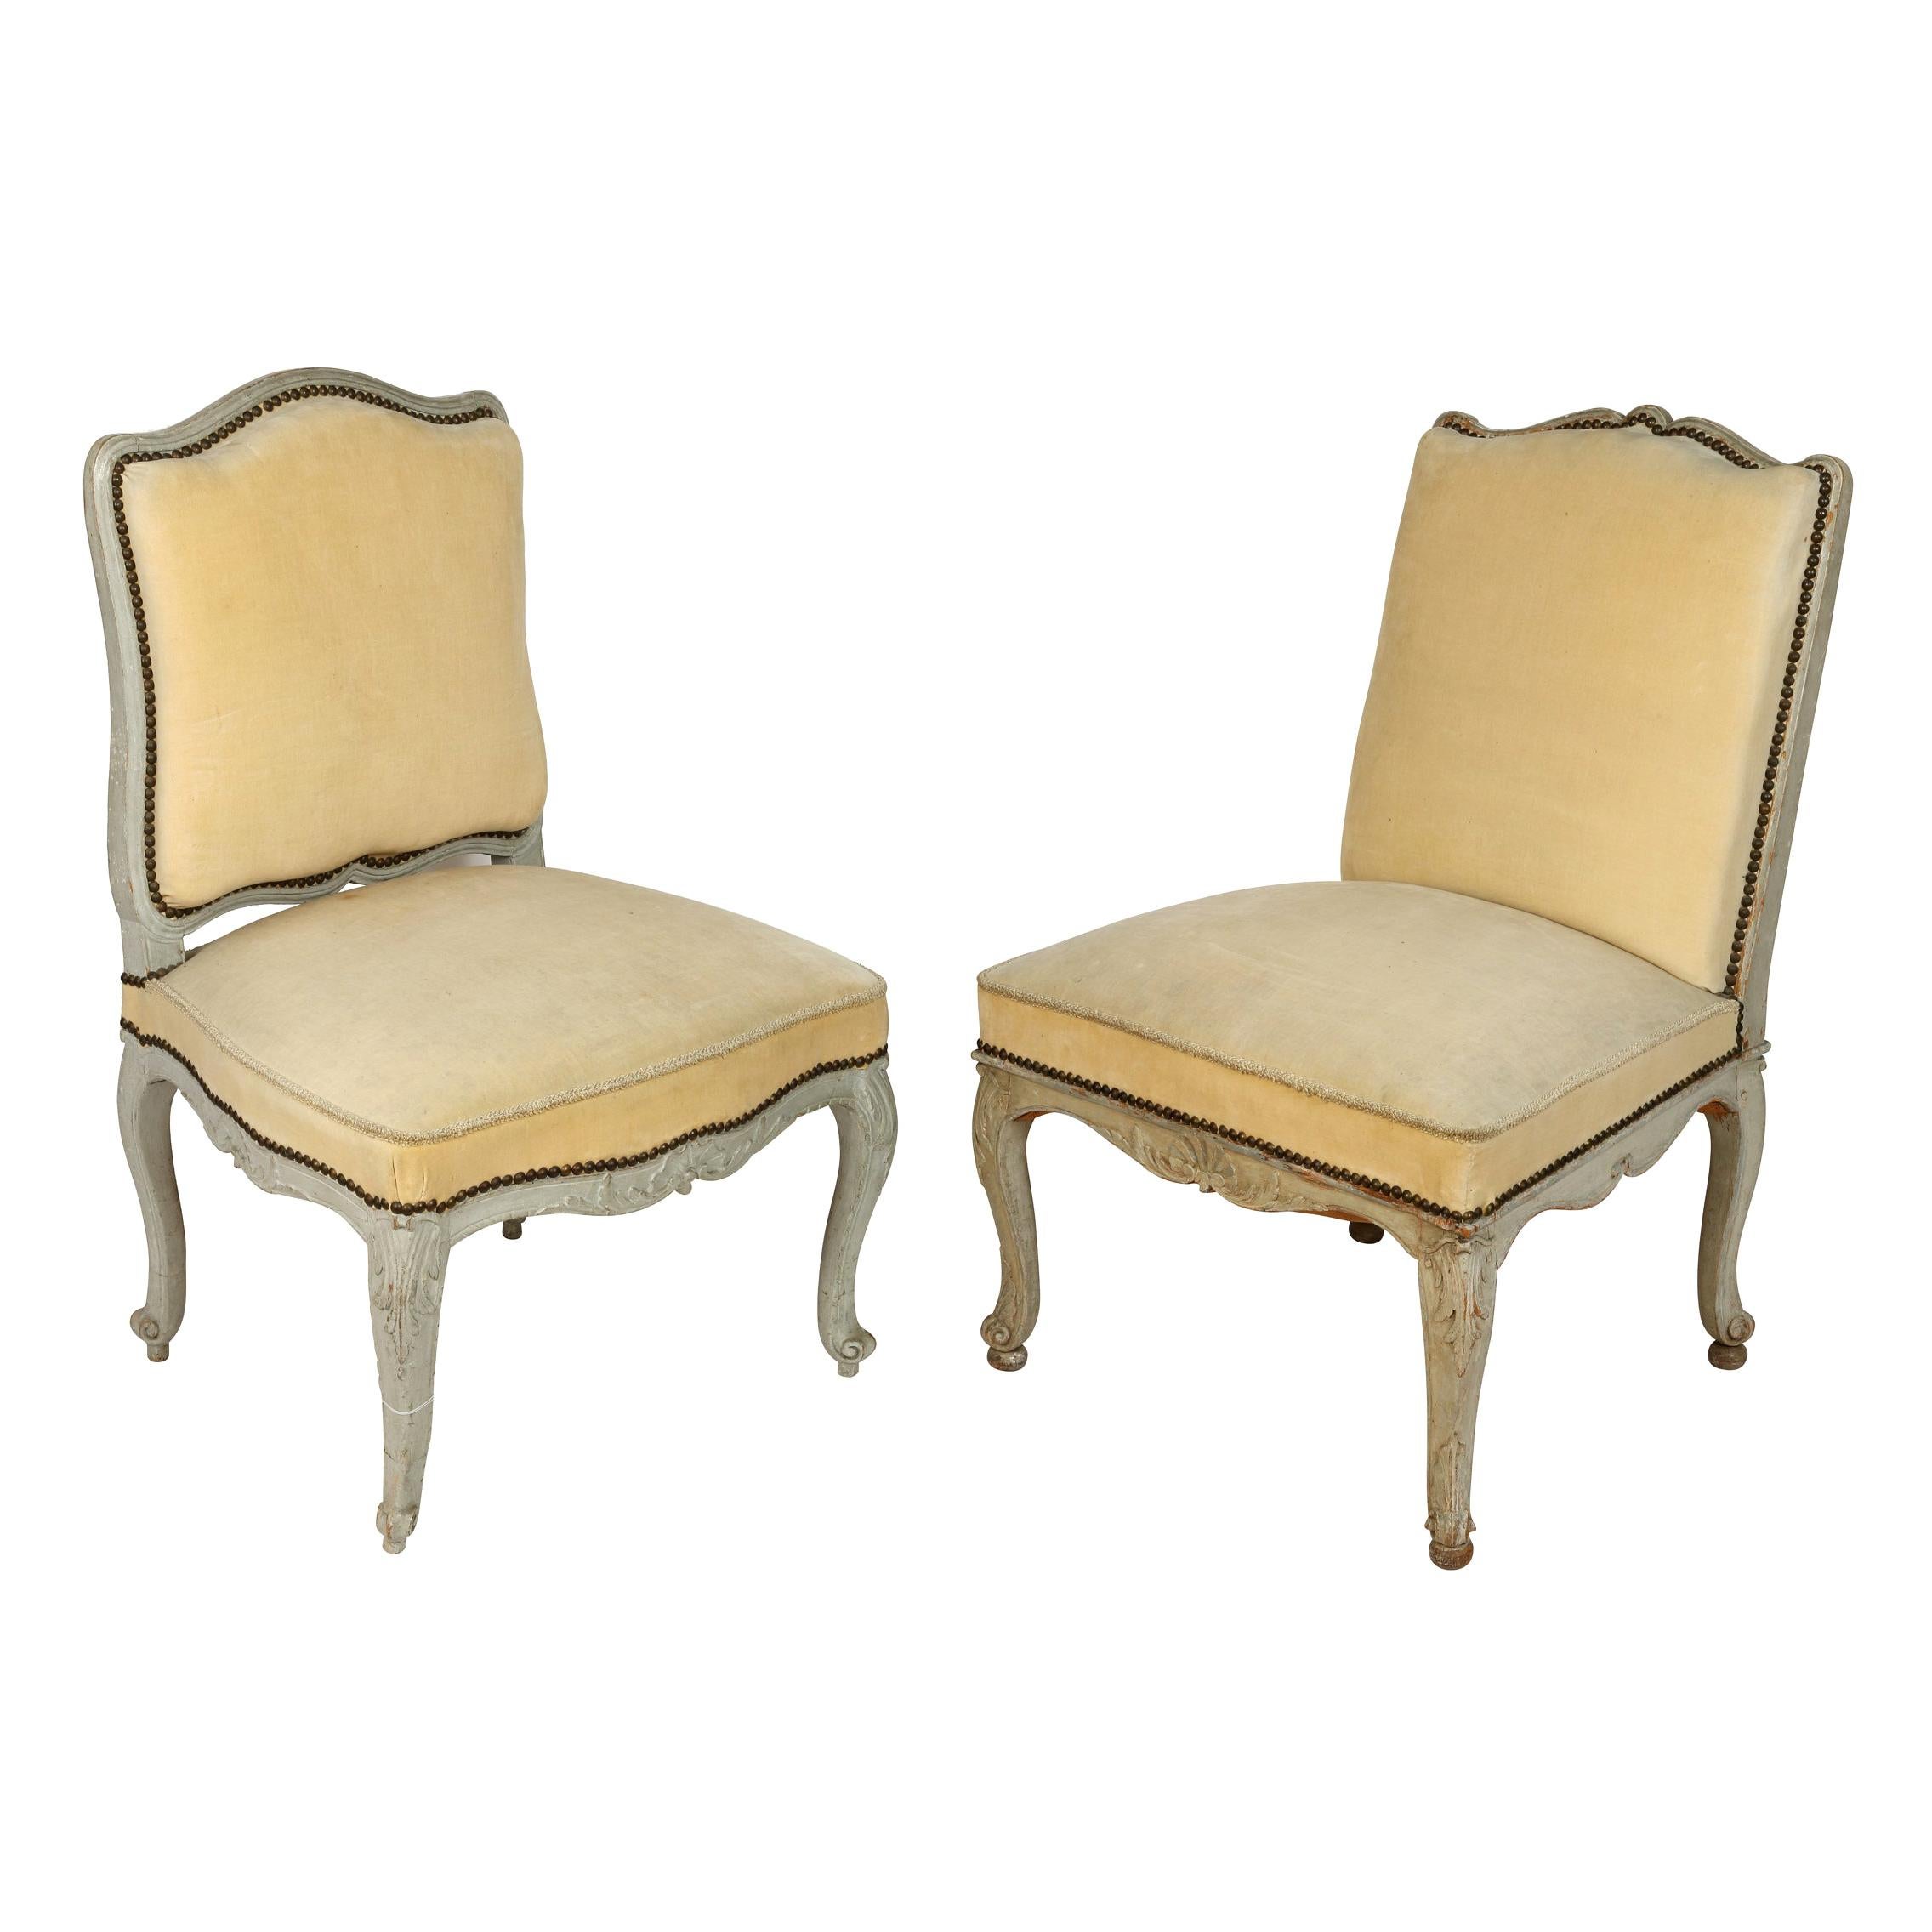 Pair of 19th Century French Painted Side Chairs